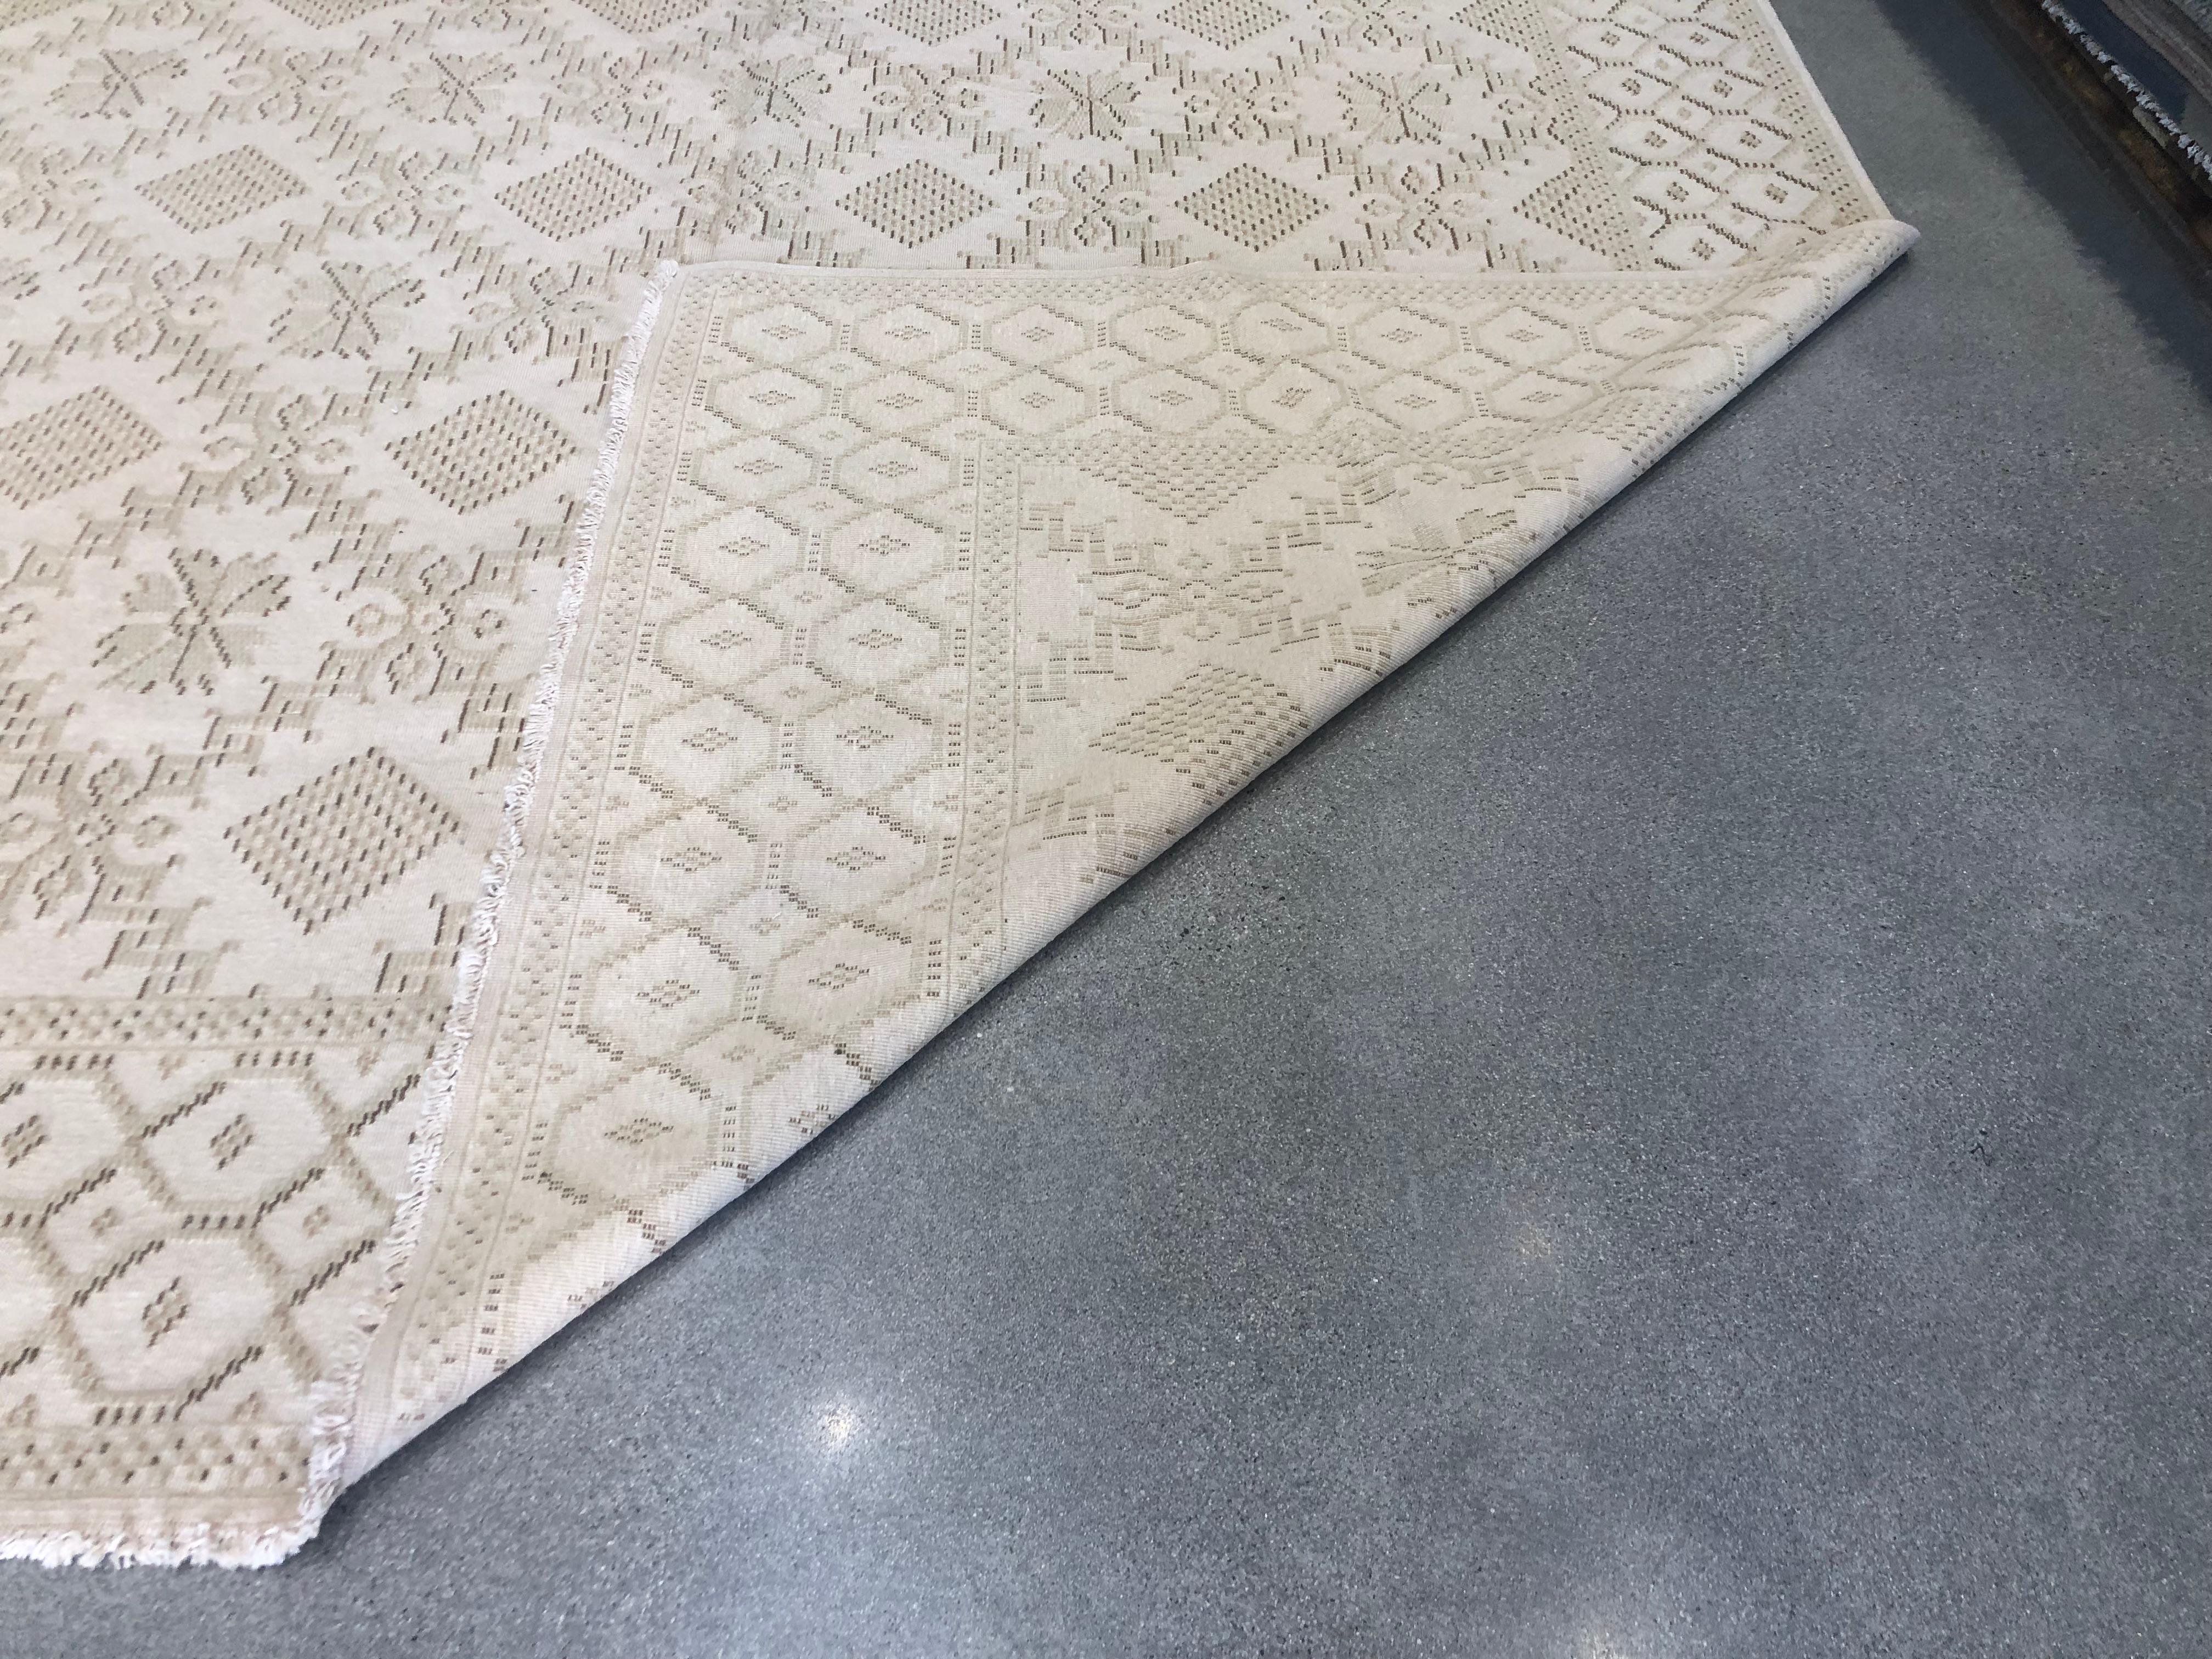 Beige is definitely not boring in this intricate design that brings to mind a curtain of handmade lace. The neutral beige and tan tones will bring warmth and light to any space. Hand knotted wool. Made in Europe.